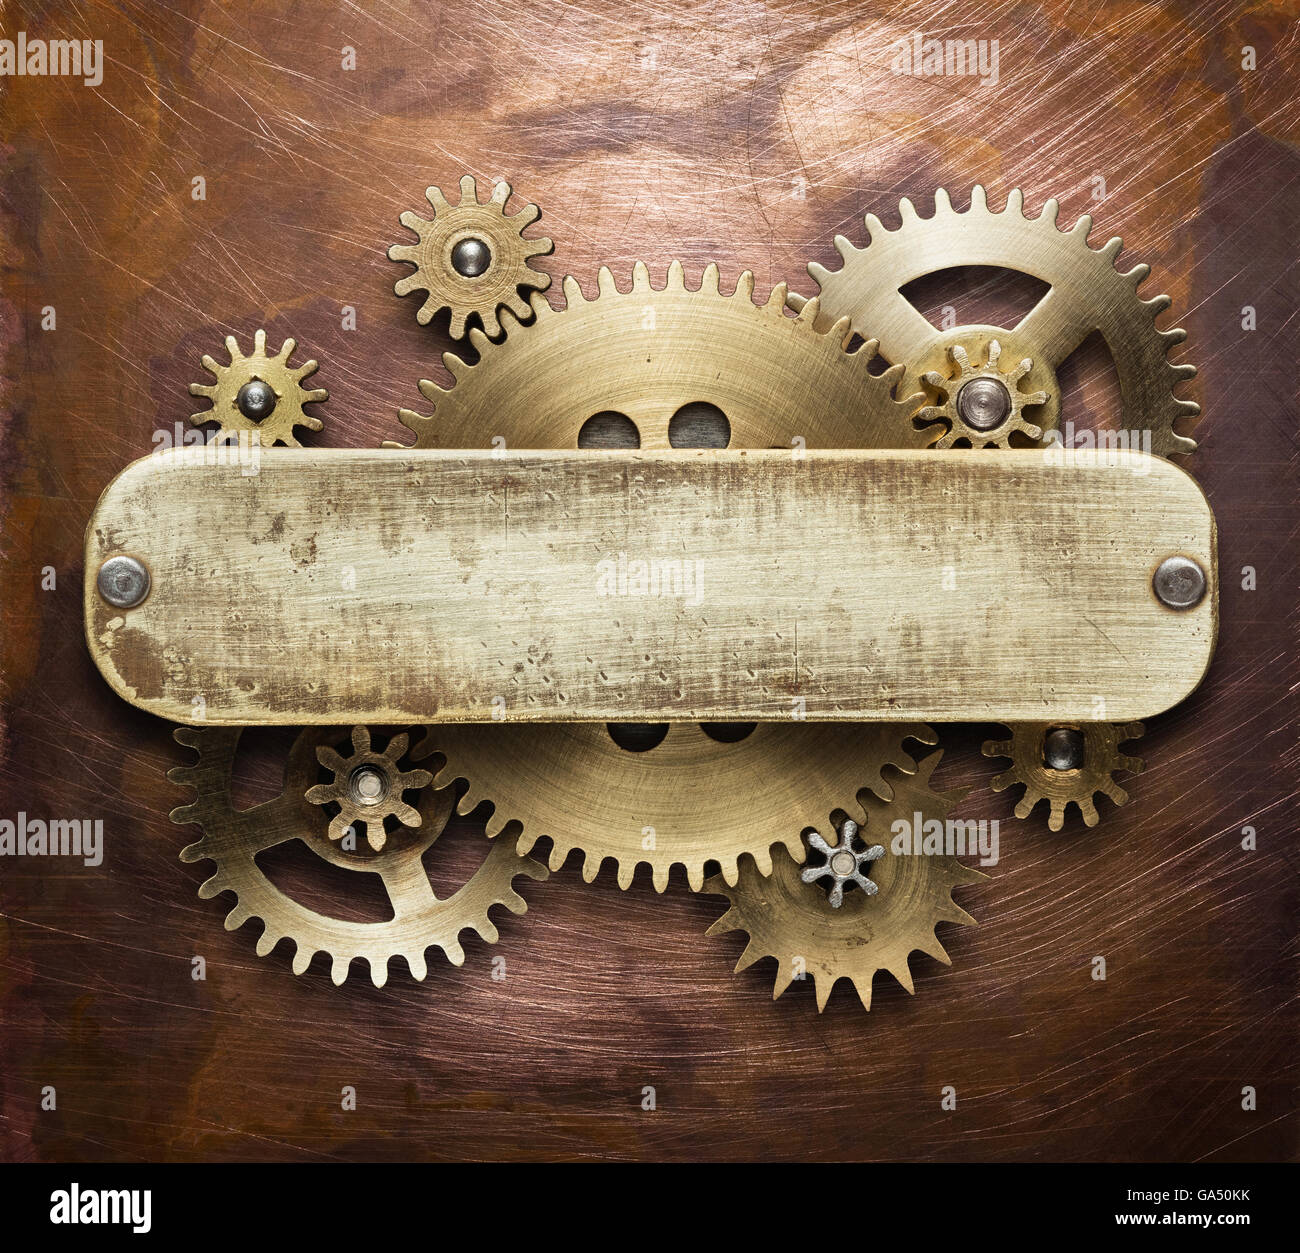 Clockwork mechanism collage on copper background made of metal gears, brass plate. Stock Photo